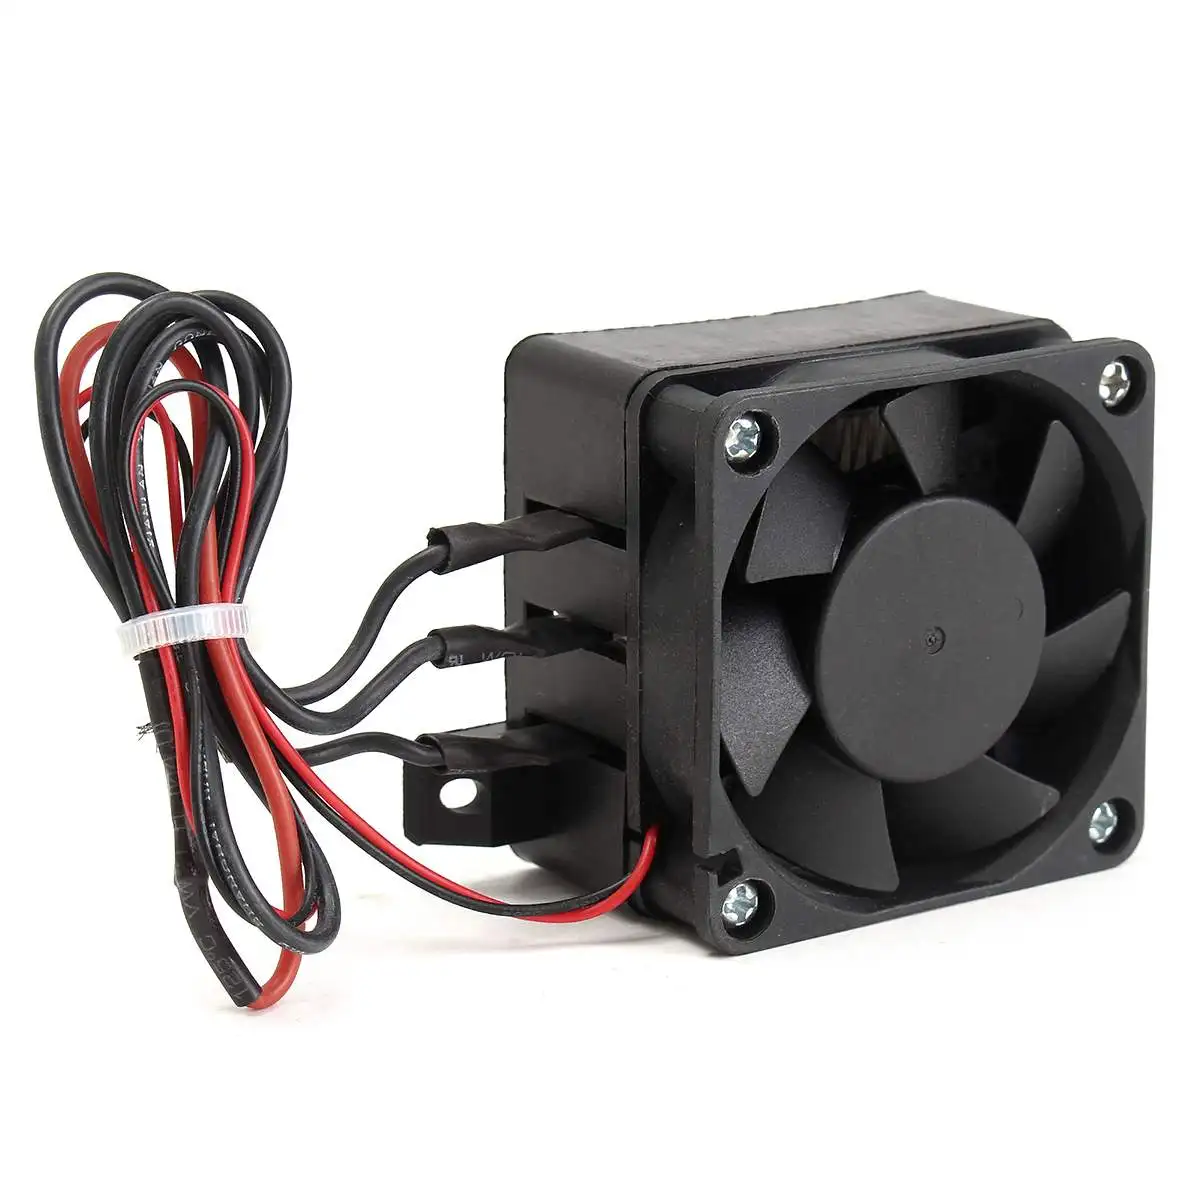 

DC 12V 150W PTC Fan Heater Constant Temperature Incubator With Connection Cable For Space Air Convection Heating